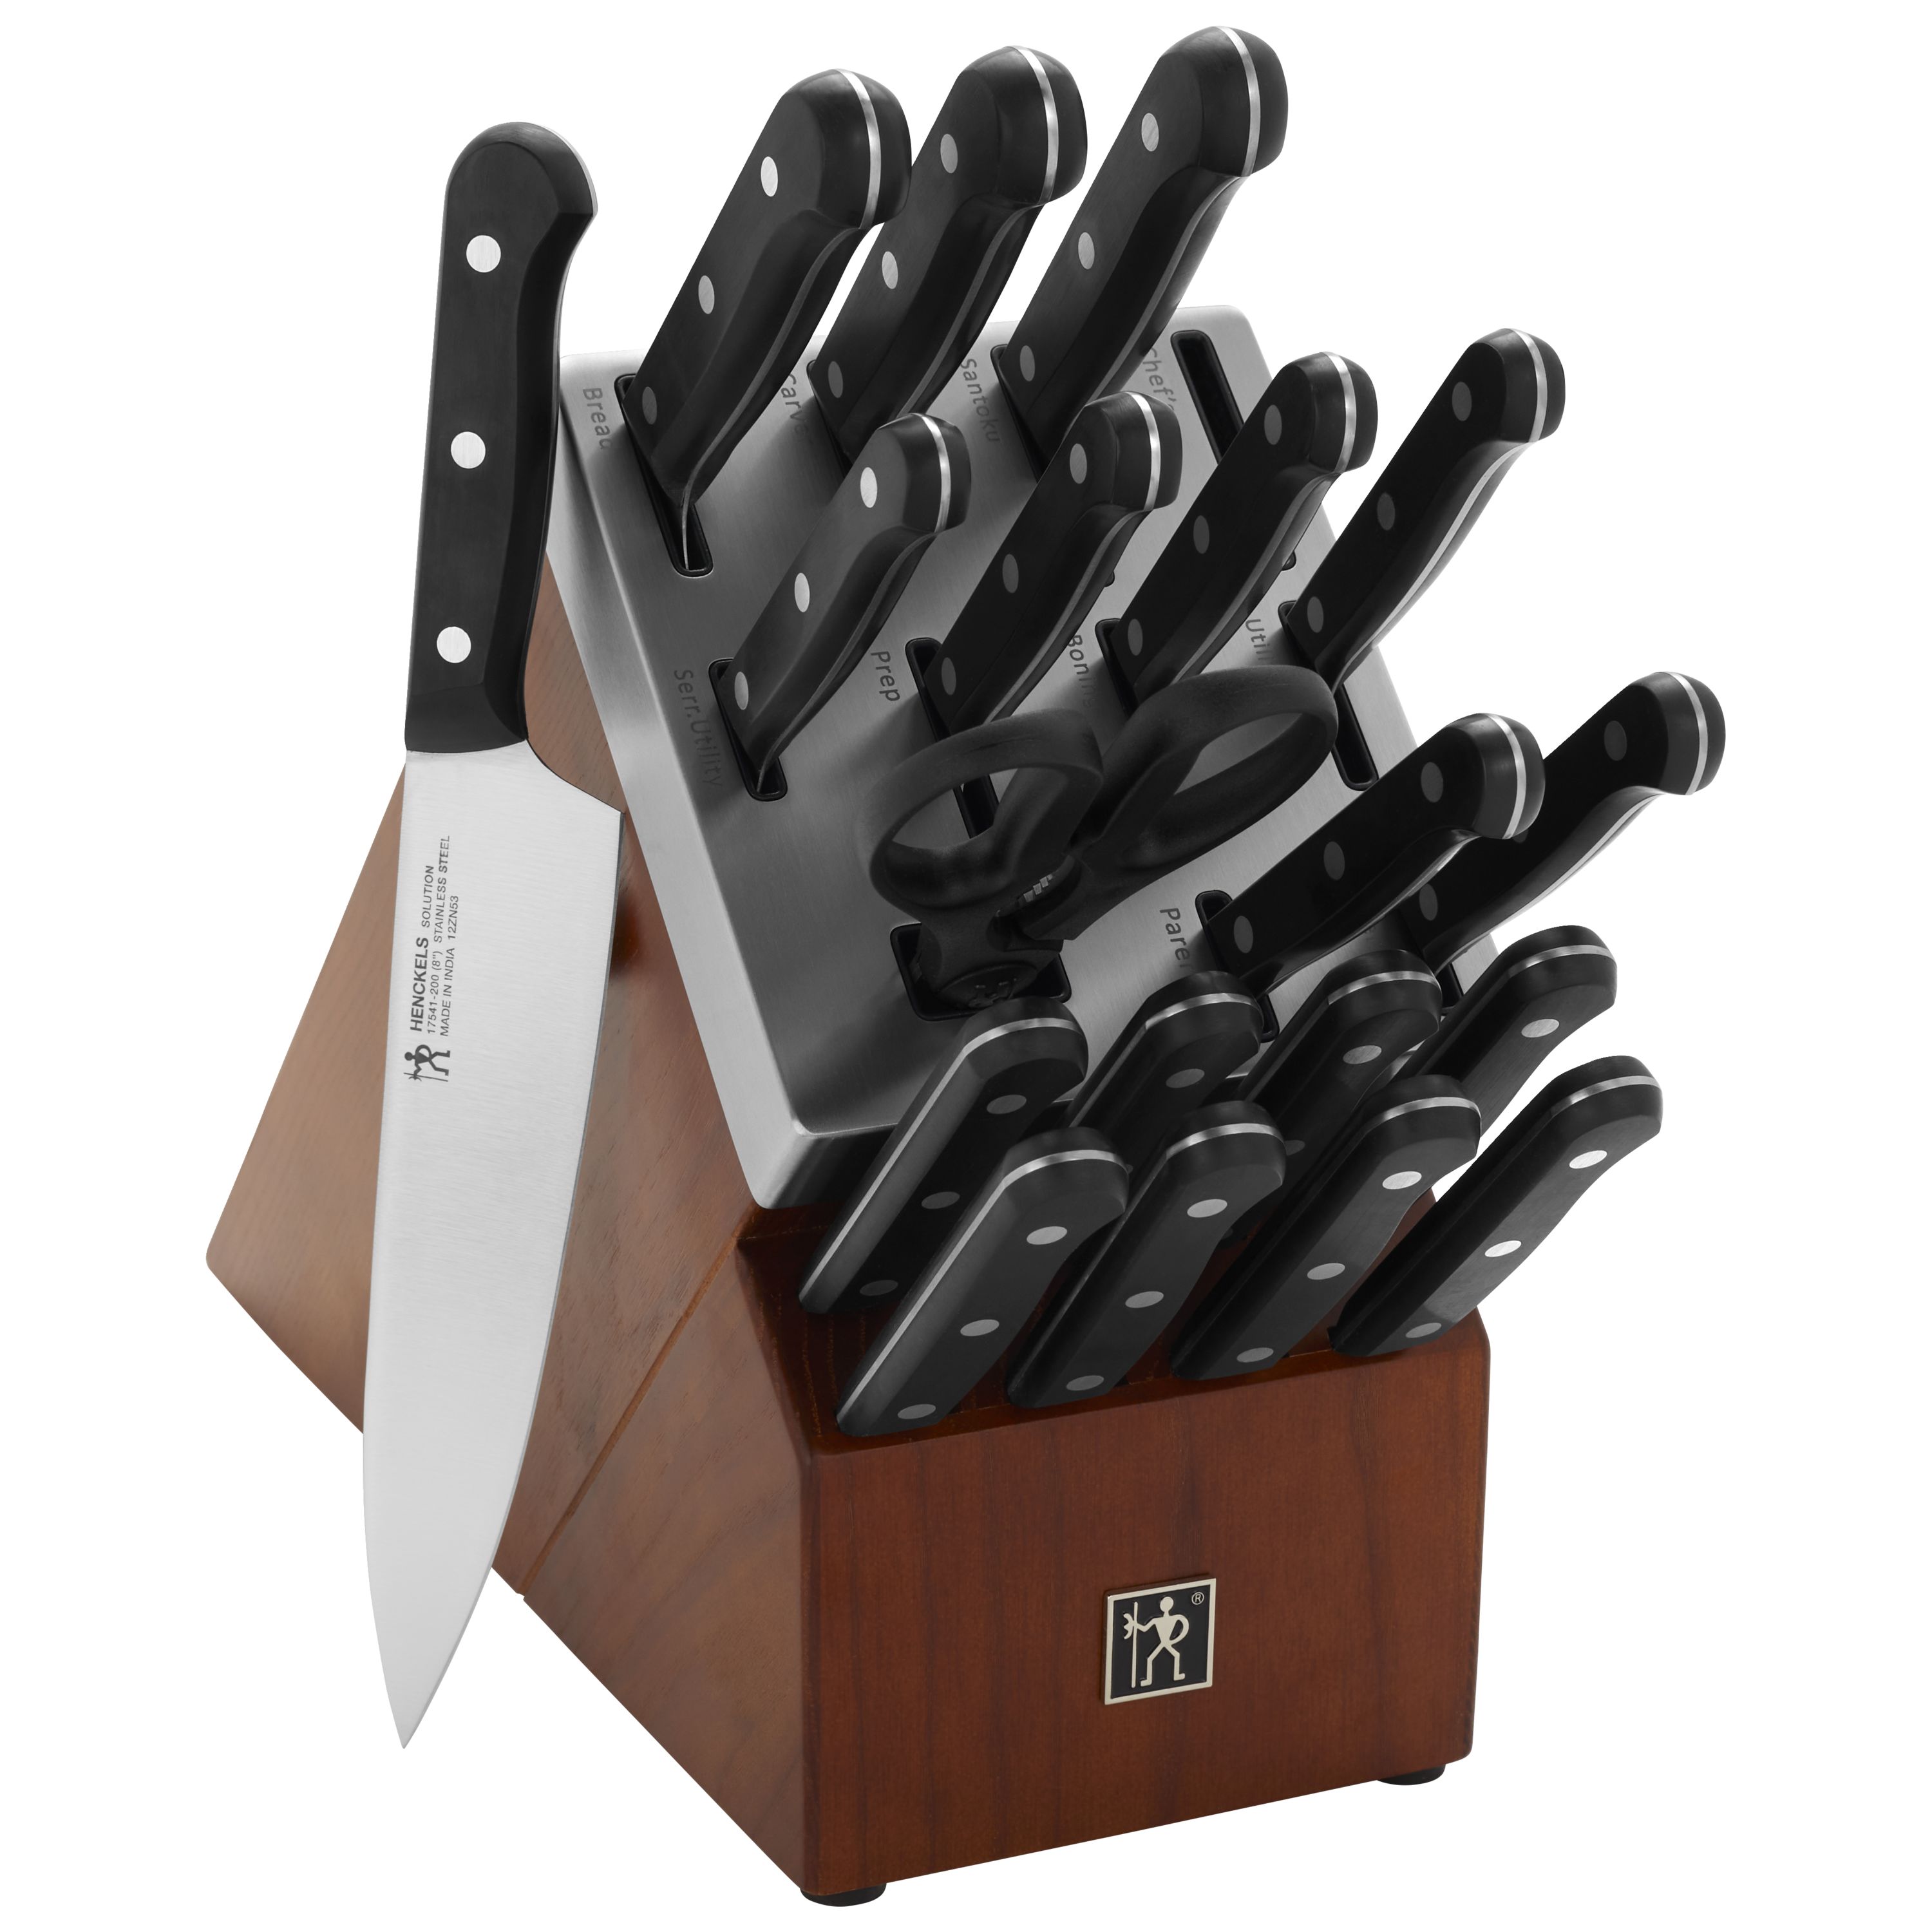 Simply Perfect 19 Pc. Stainless Steel Knife Block Set